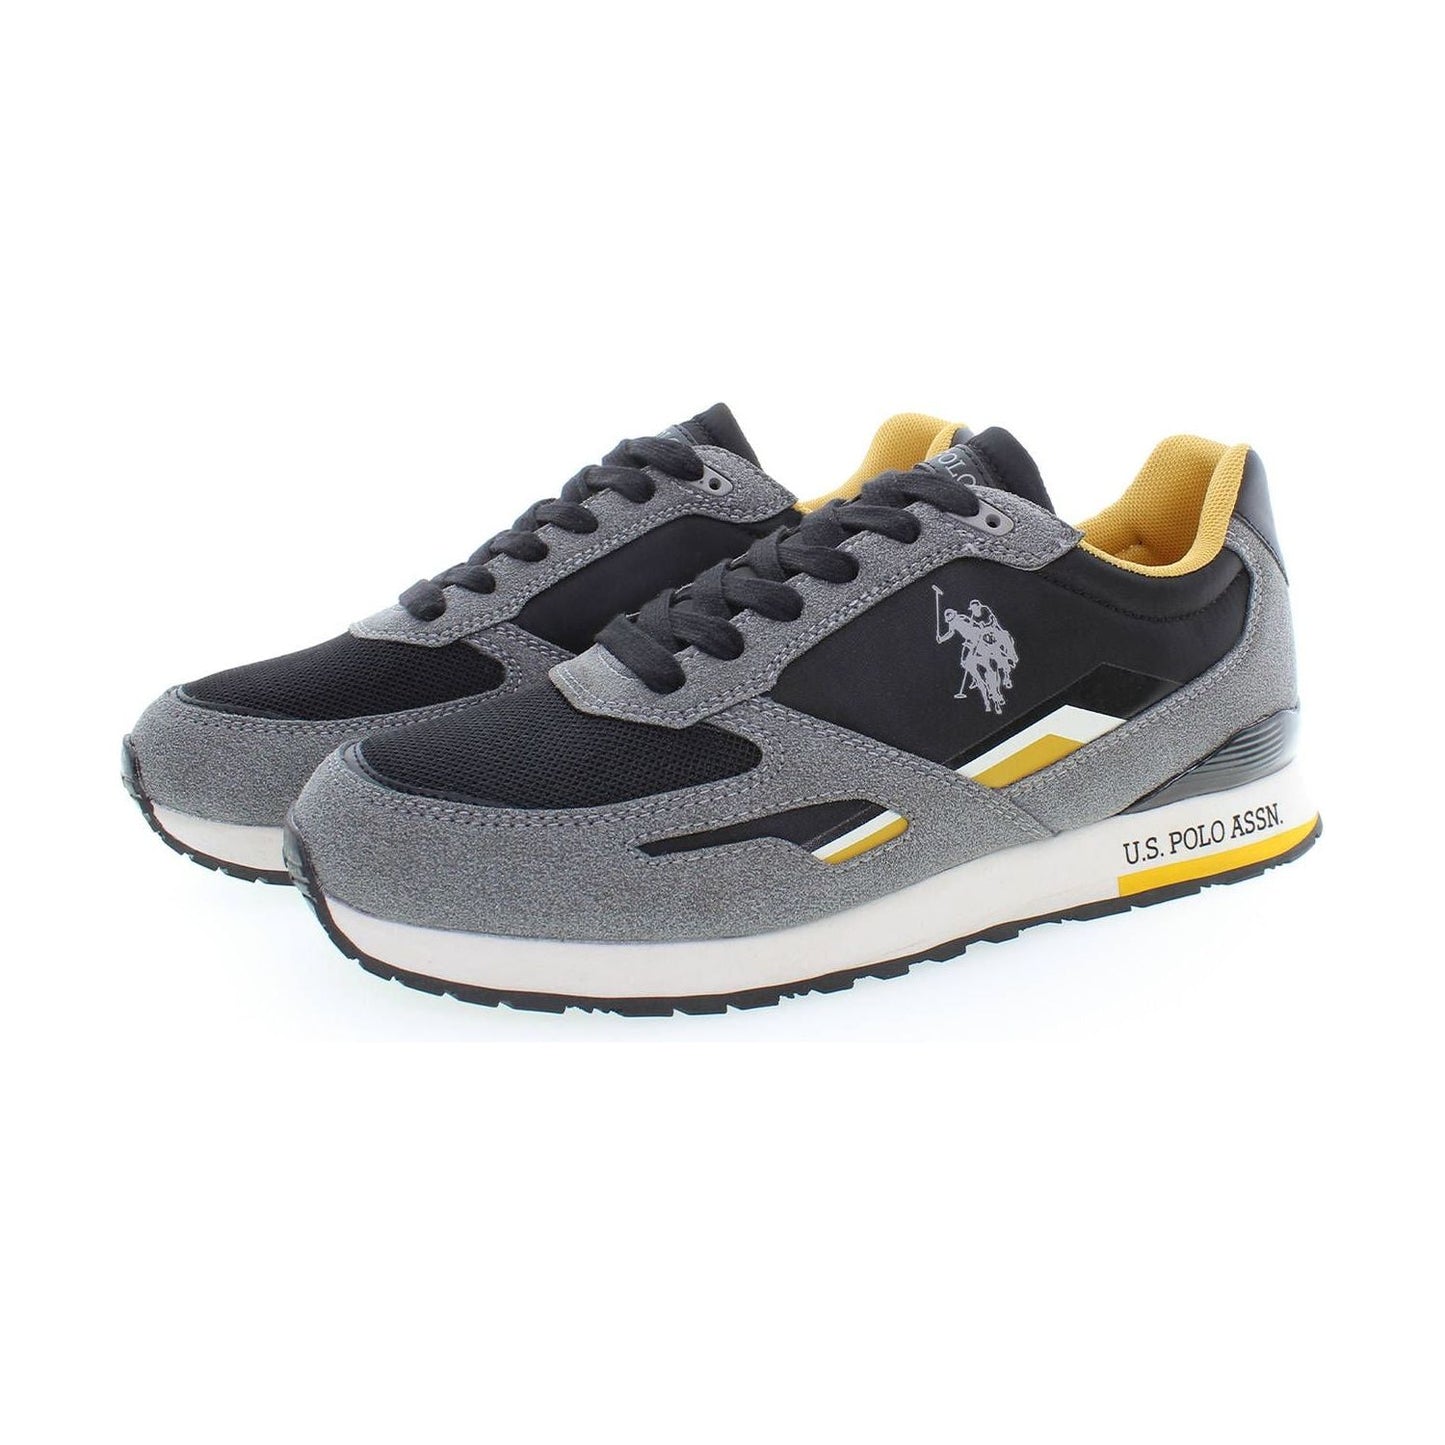 U.S. POLO ASSN. Chic Gray Lace-Up Sporty Sneakers chic-gray-lace-up-sporty-sneakers